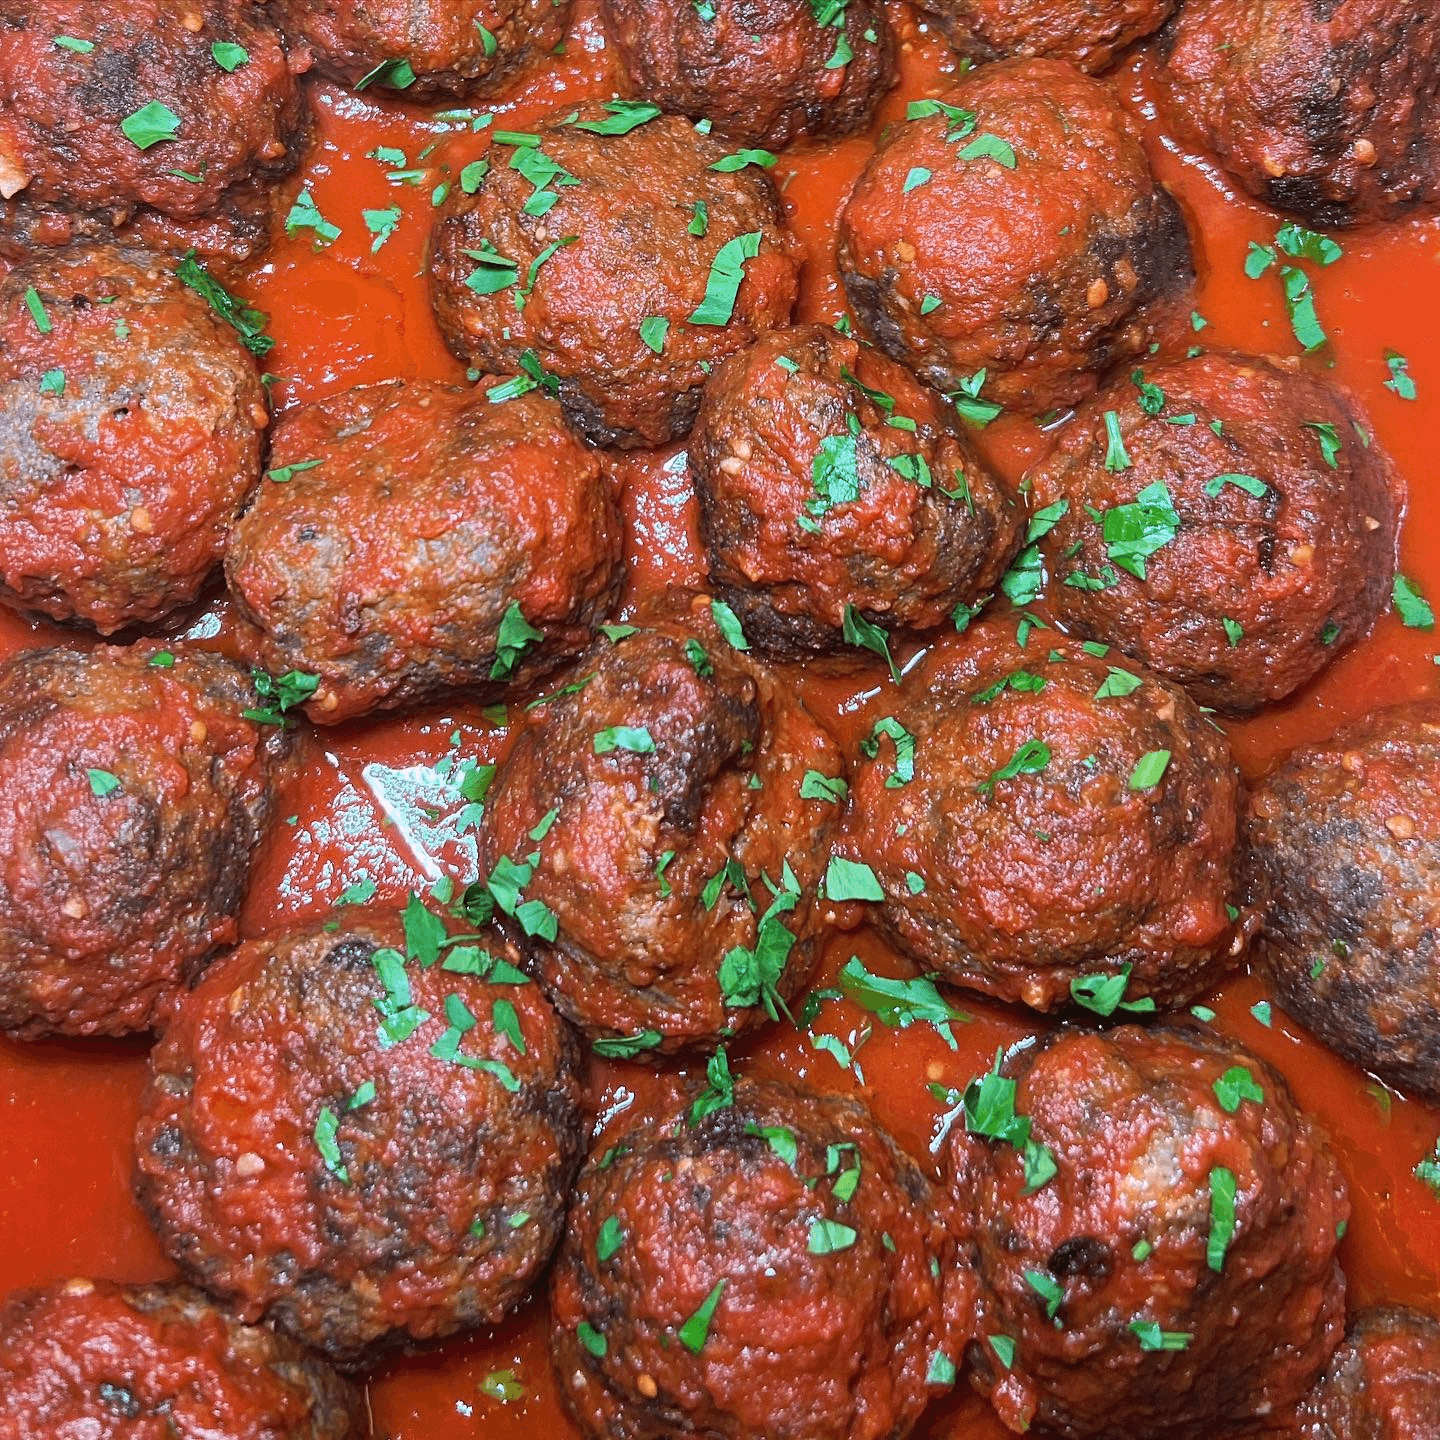 What sets our meatballs apart?